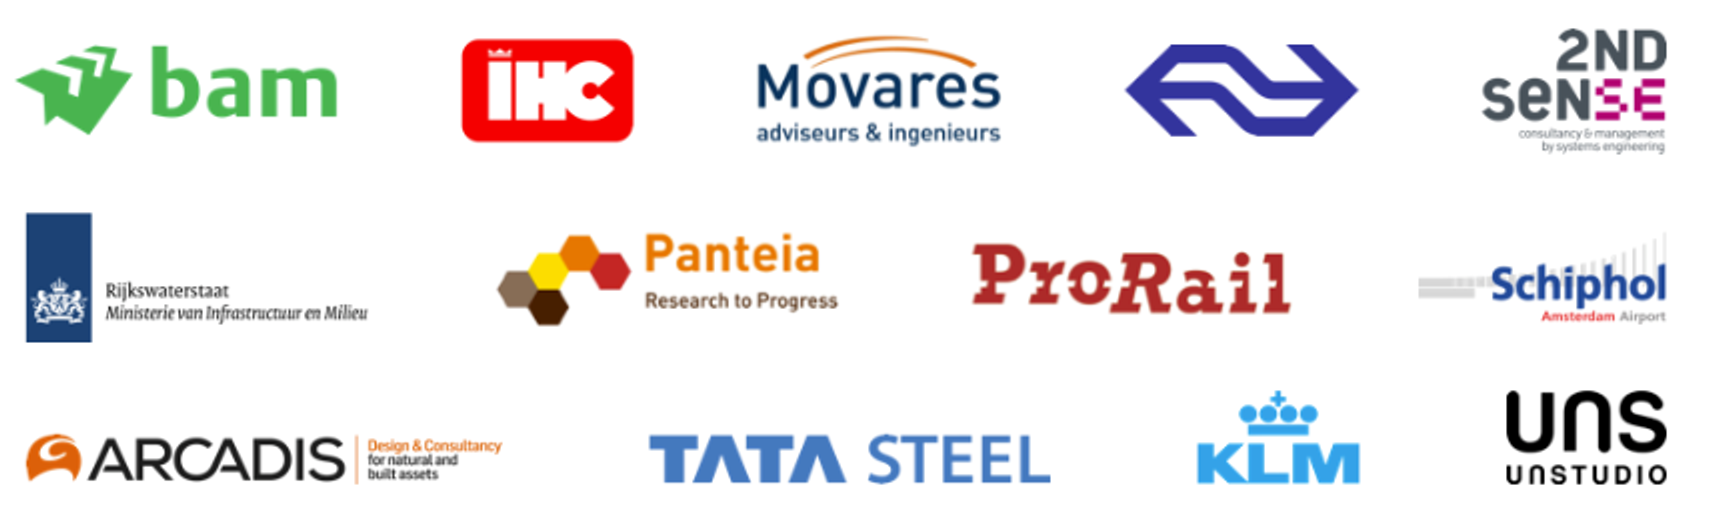 These are the partners that collaborated in the study.